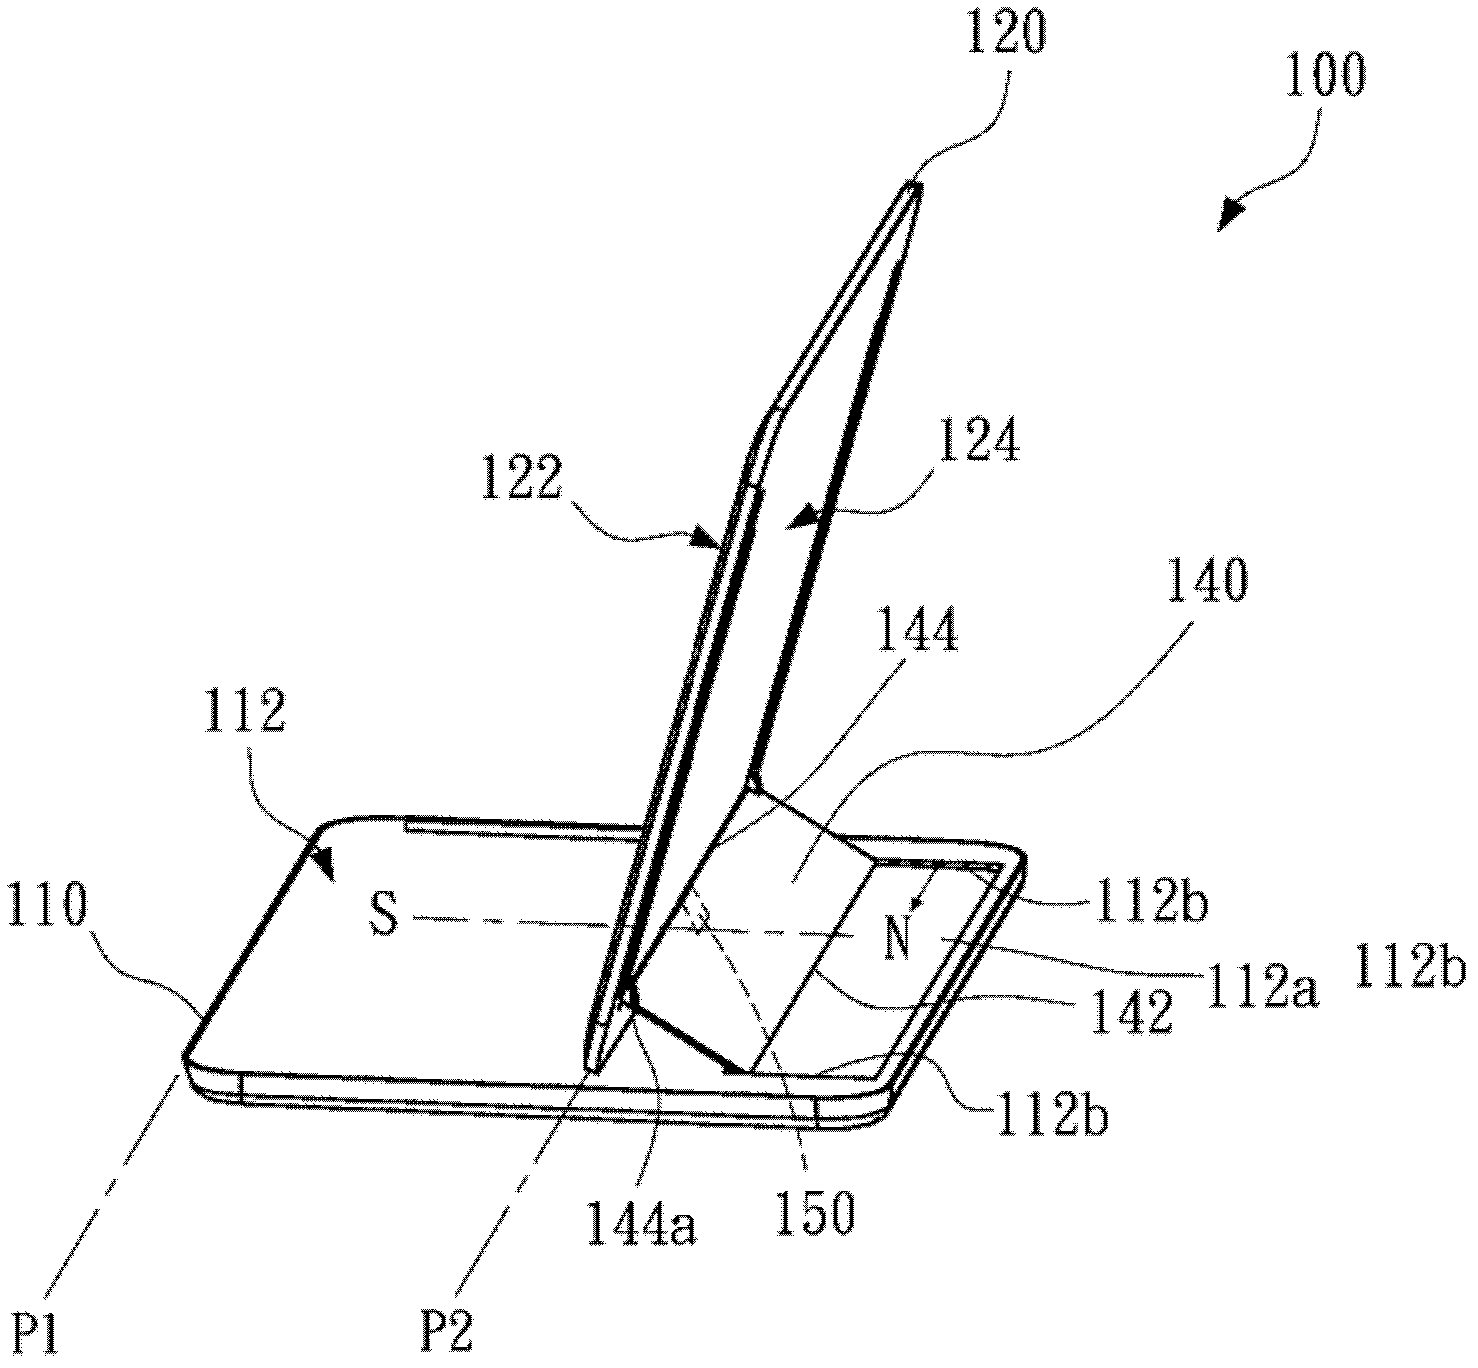 Clamshell type electronic device